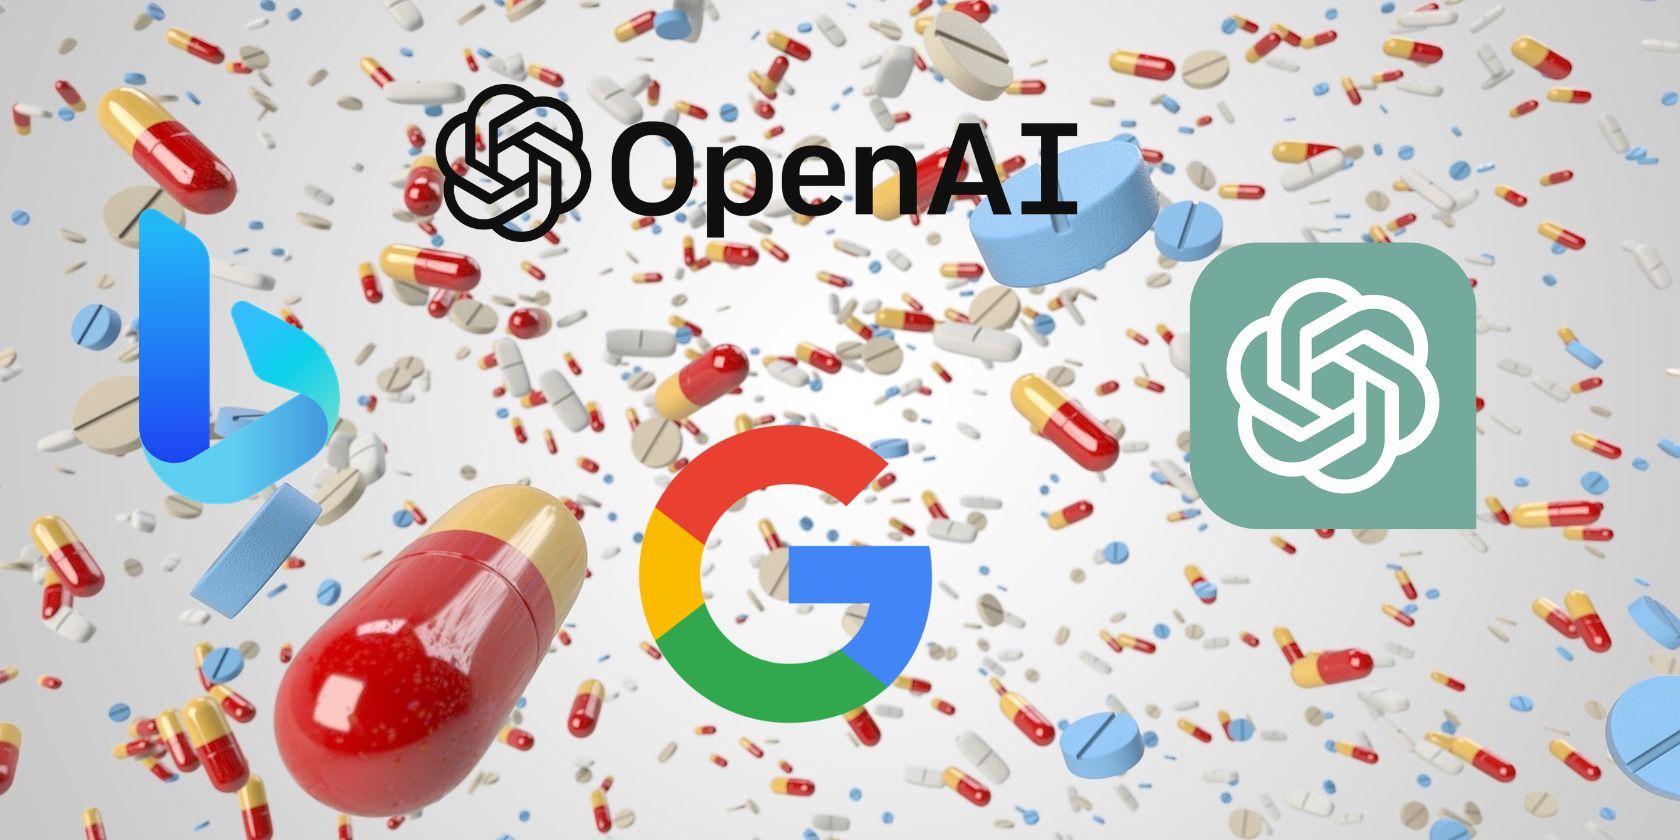 Logos of Tech Companies on Top of Colored Pills